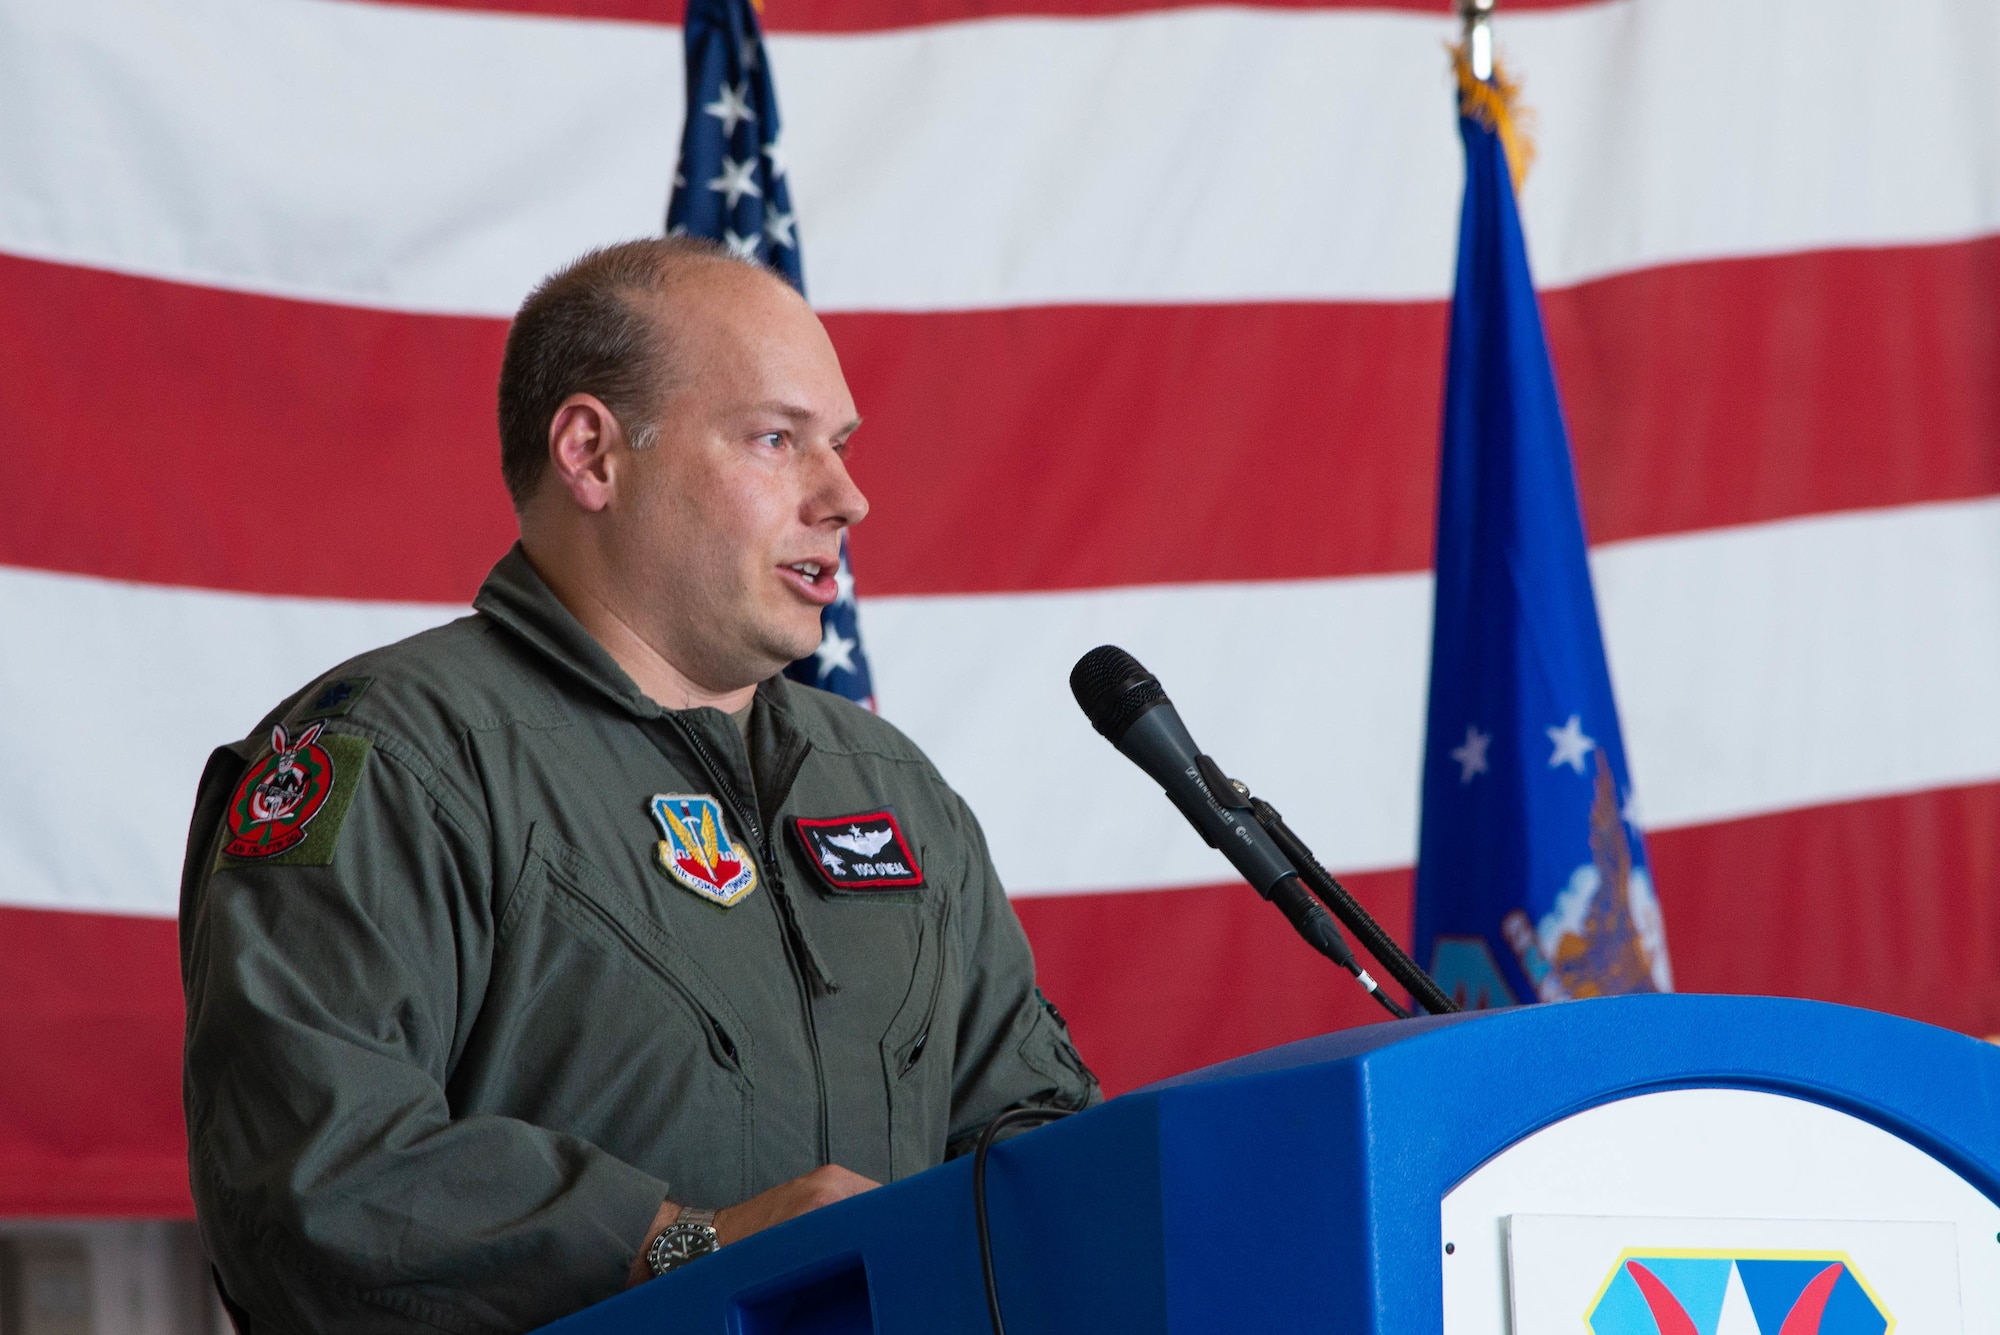 An image from an activation of the 306th Fighter Squadron at the 177th Fighter Wing.